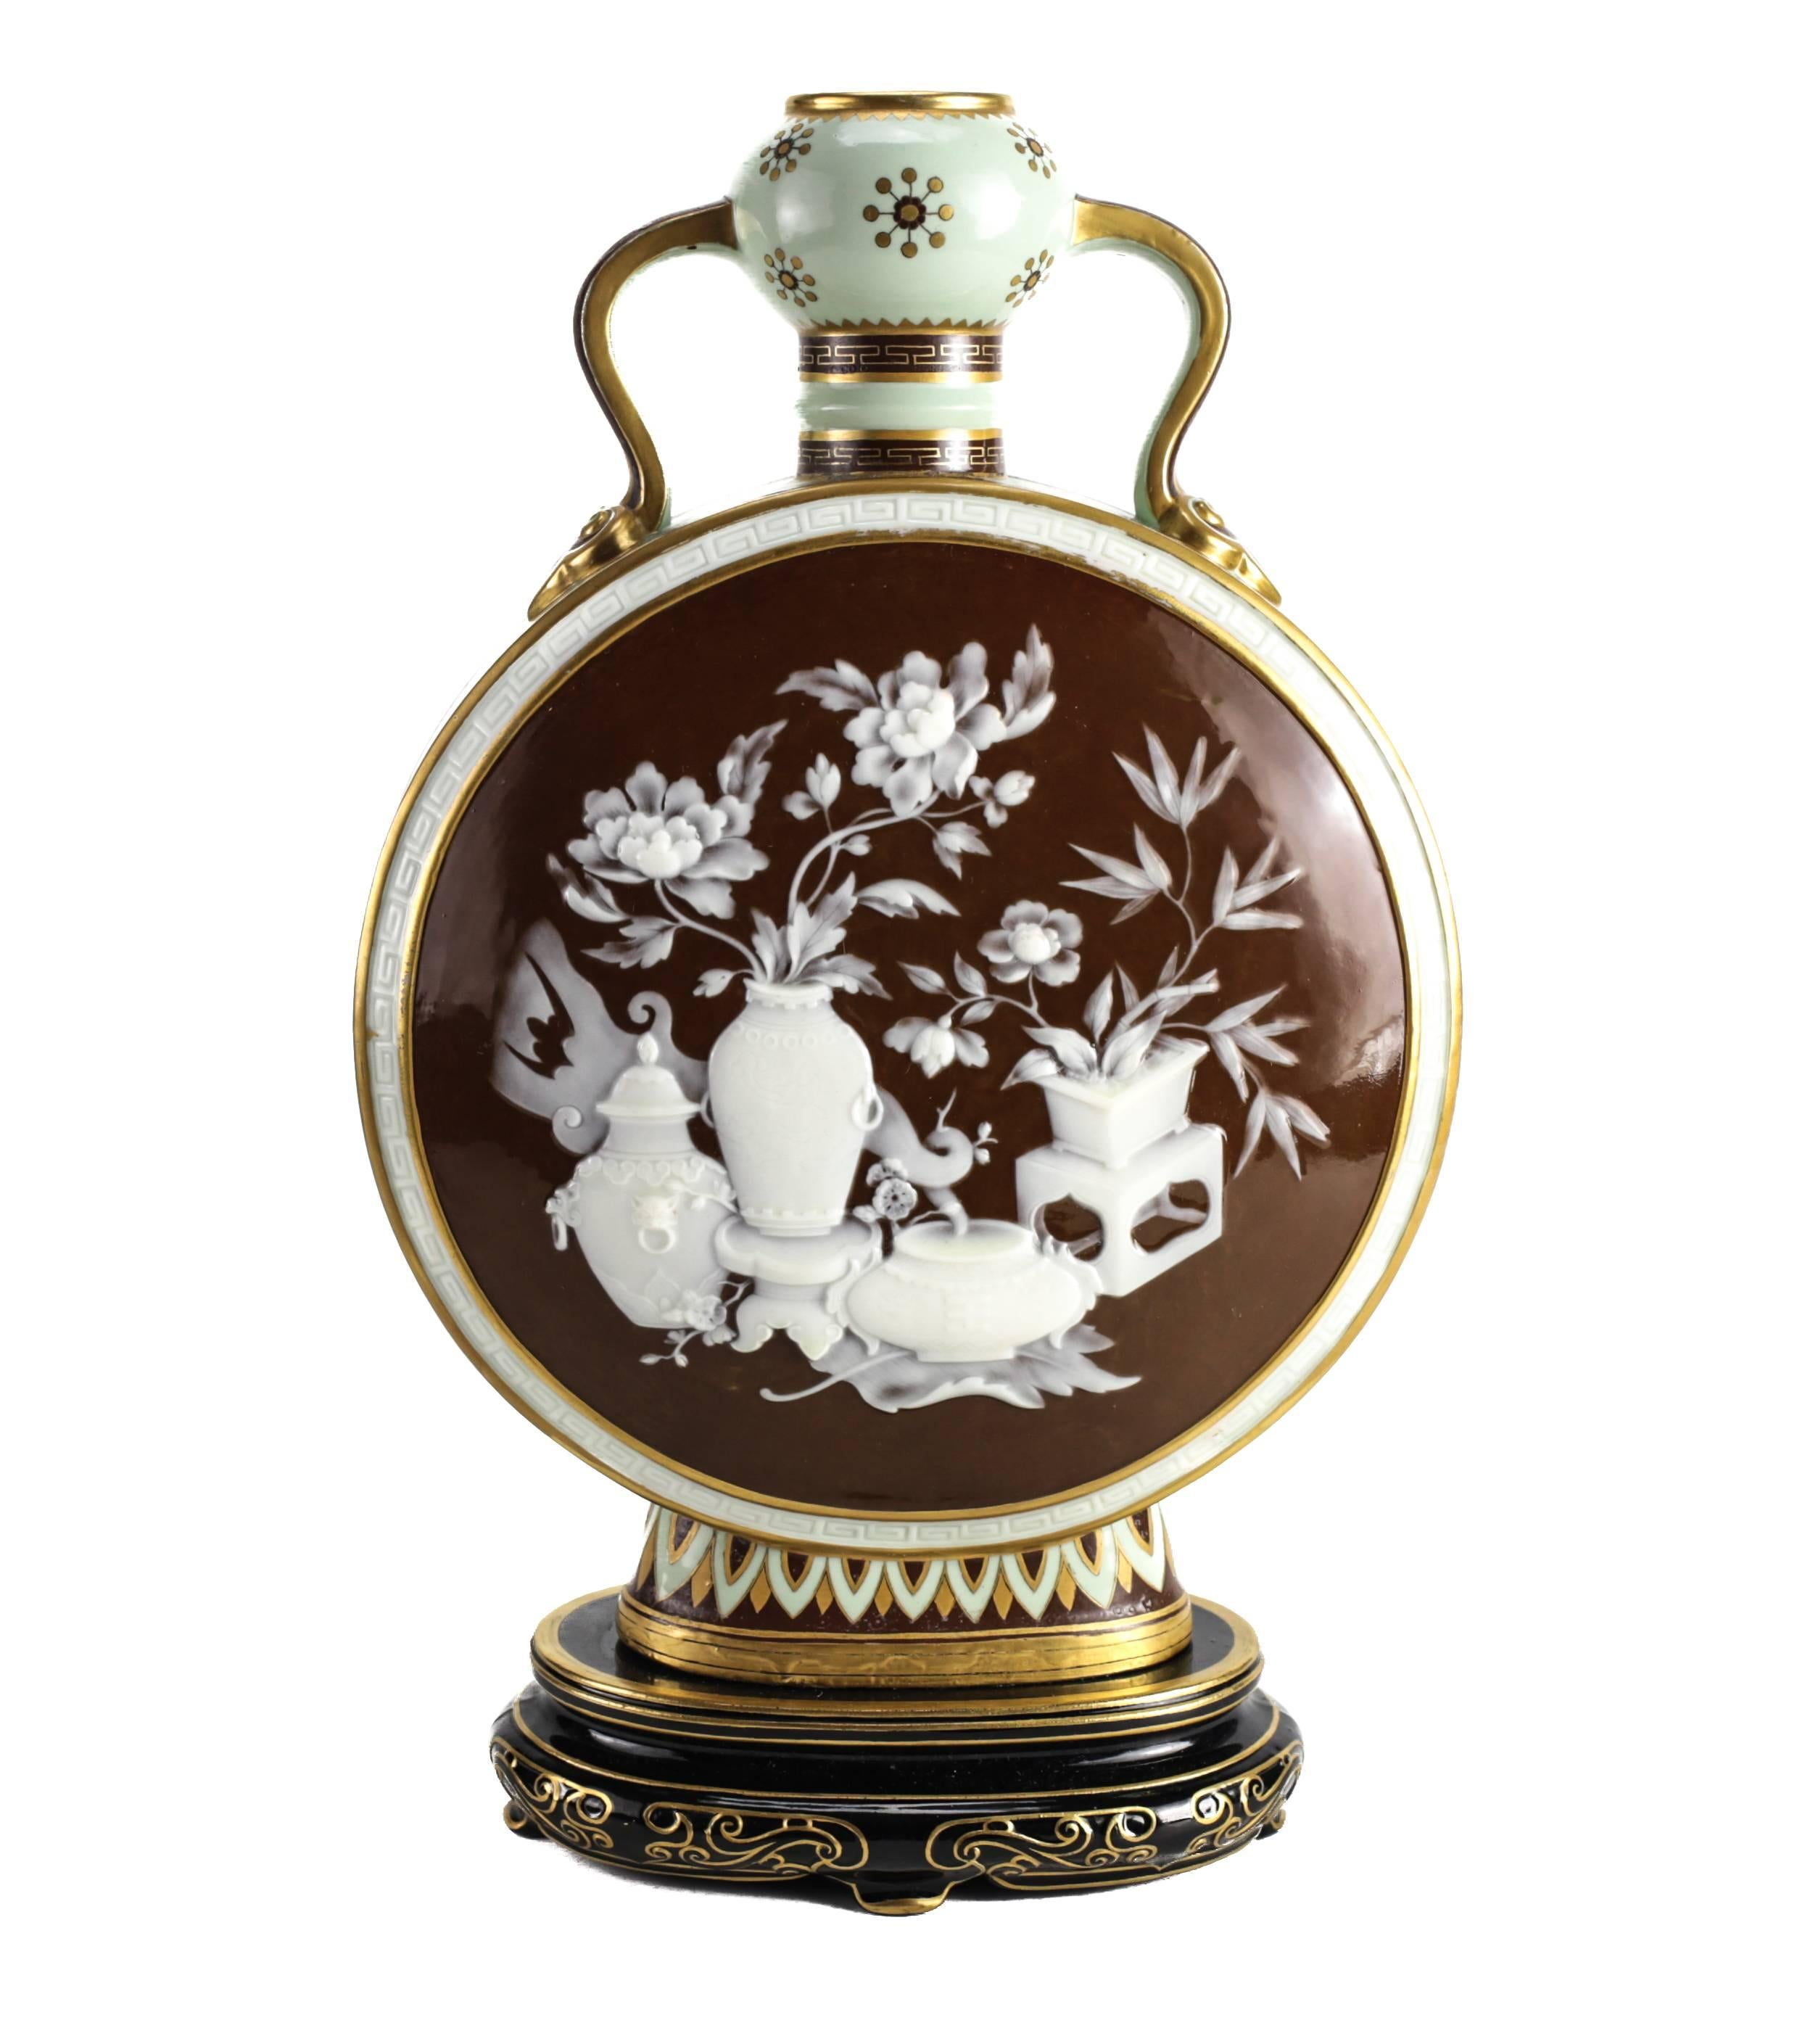 A large and impressive moon flask bottle or vase by Minton. Both sides with elaborate Chinoiserie decoration in pate sur pate white slip (paste on paste) on a chocolate brown ground with the faces and hands in beige slip. The shape takes the form of